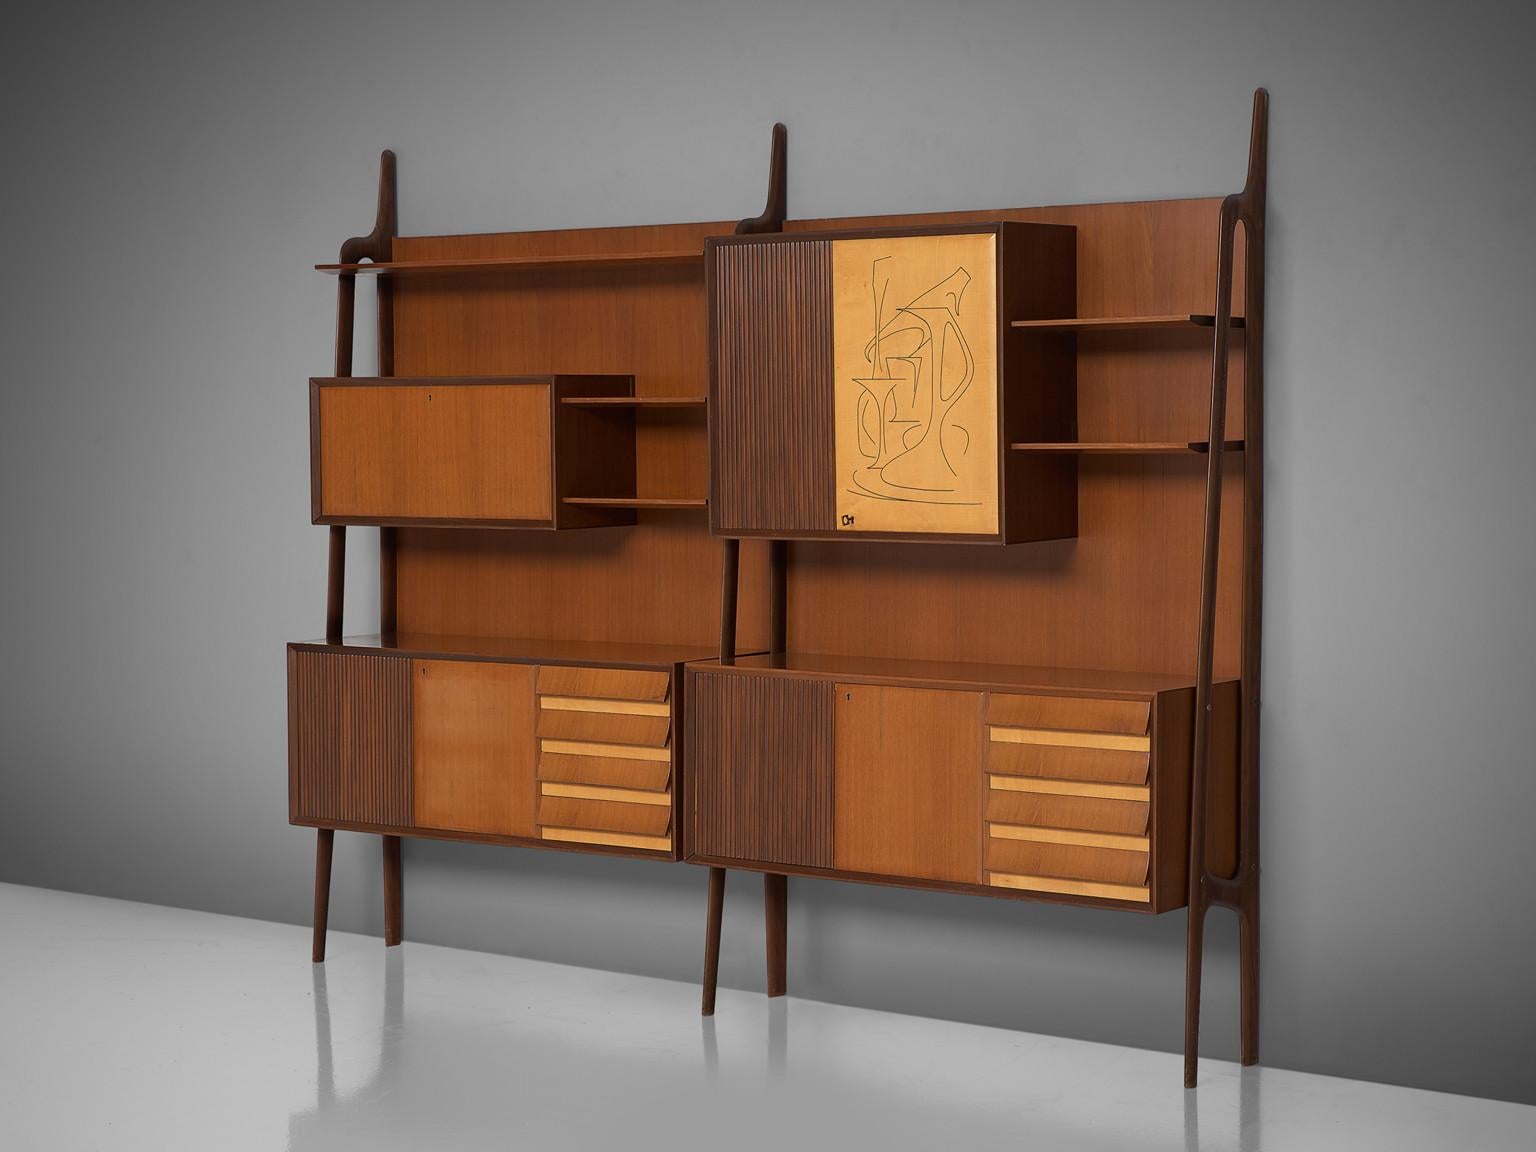 Italian wall unit, walnut, maple, brass, Italy, 1950s

Rare Italian wall unit in the style of Ico Parisi, Paolo Buffa and Vittorio Dassi on subtle tapered legs. This characteristic Italian cabinet is equipped with doors, drawers, shelves and a dry